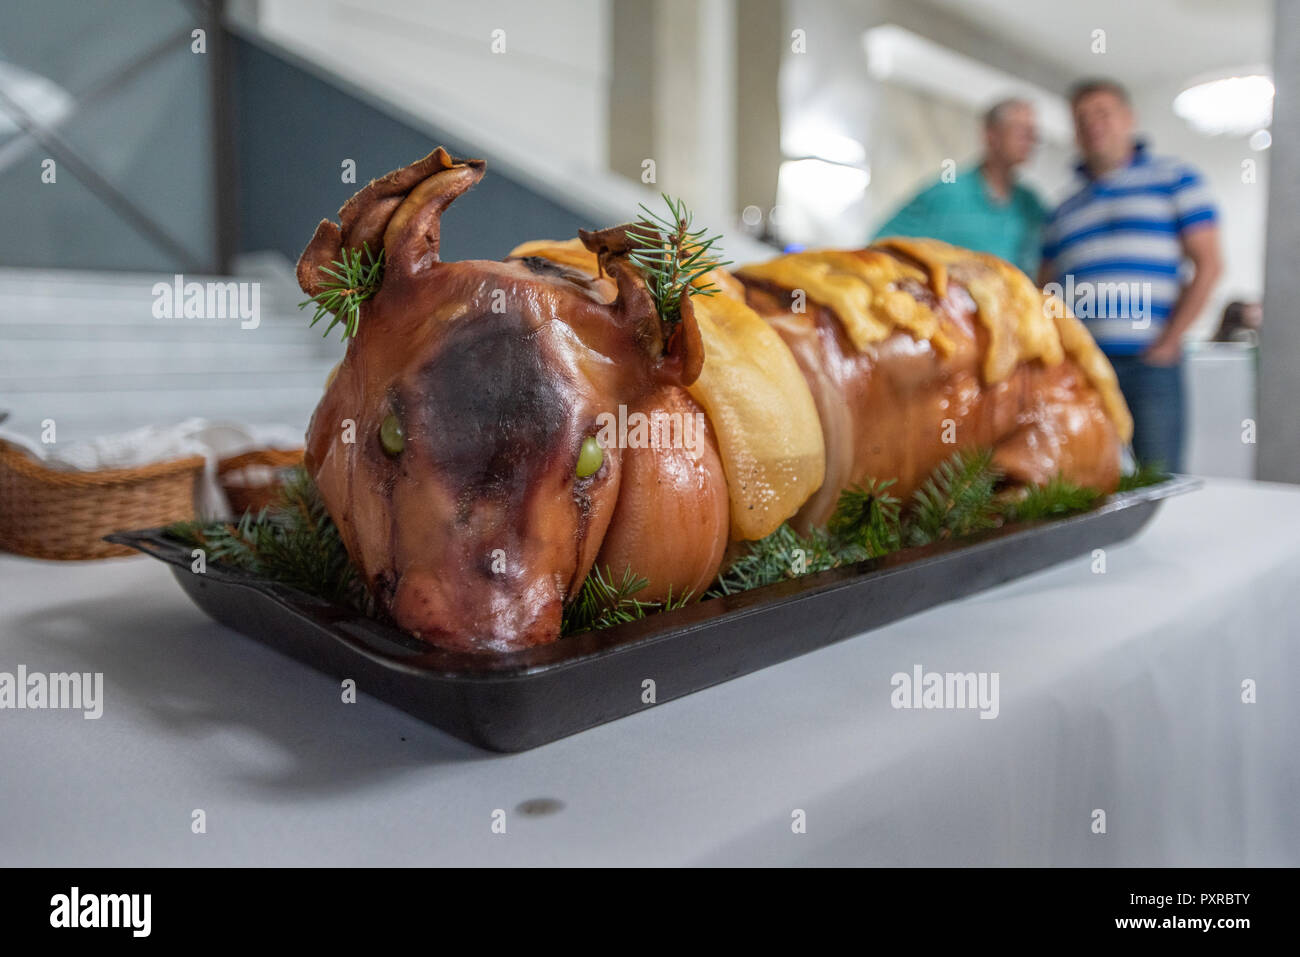 Whole roasted pig garnished with grapes and pine leaves for Polish banquet, Masovian Voivodeship, Poland Stock Photo